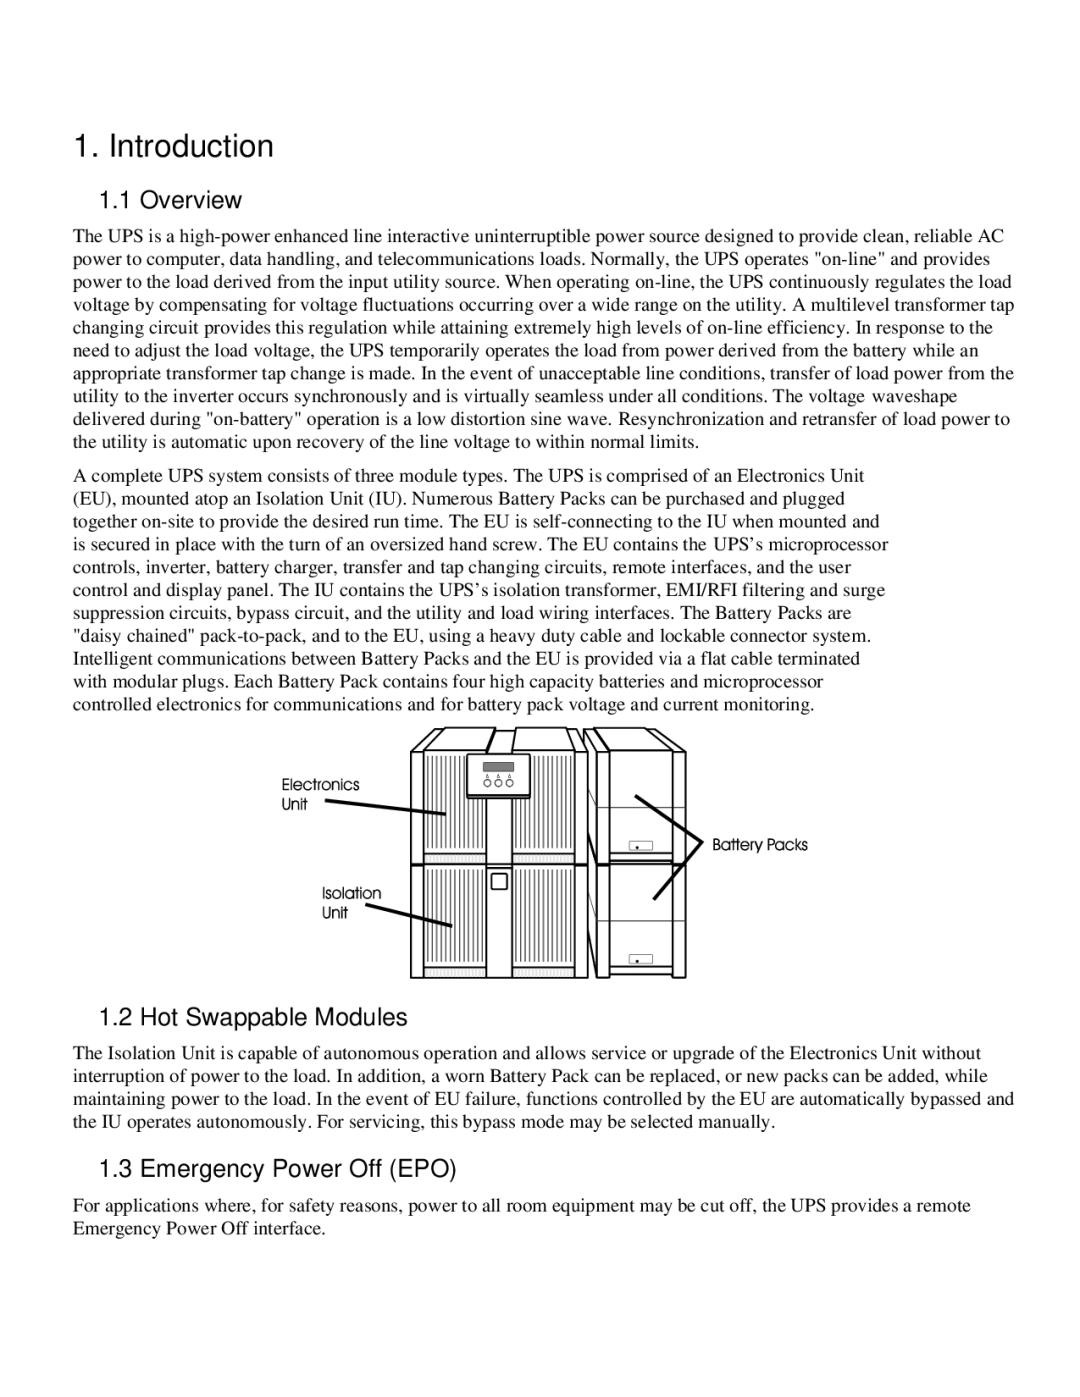 American Power Conversion MatrixTM UPS user manual Introduction, Overview, Hot Swappable Modules, Emergency Power Off EPO 